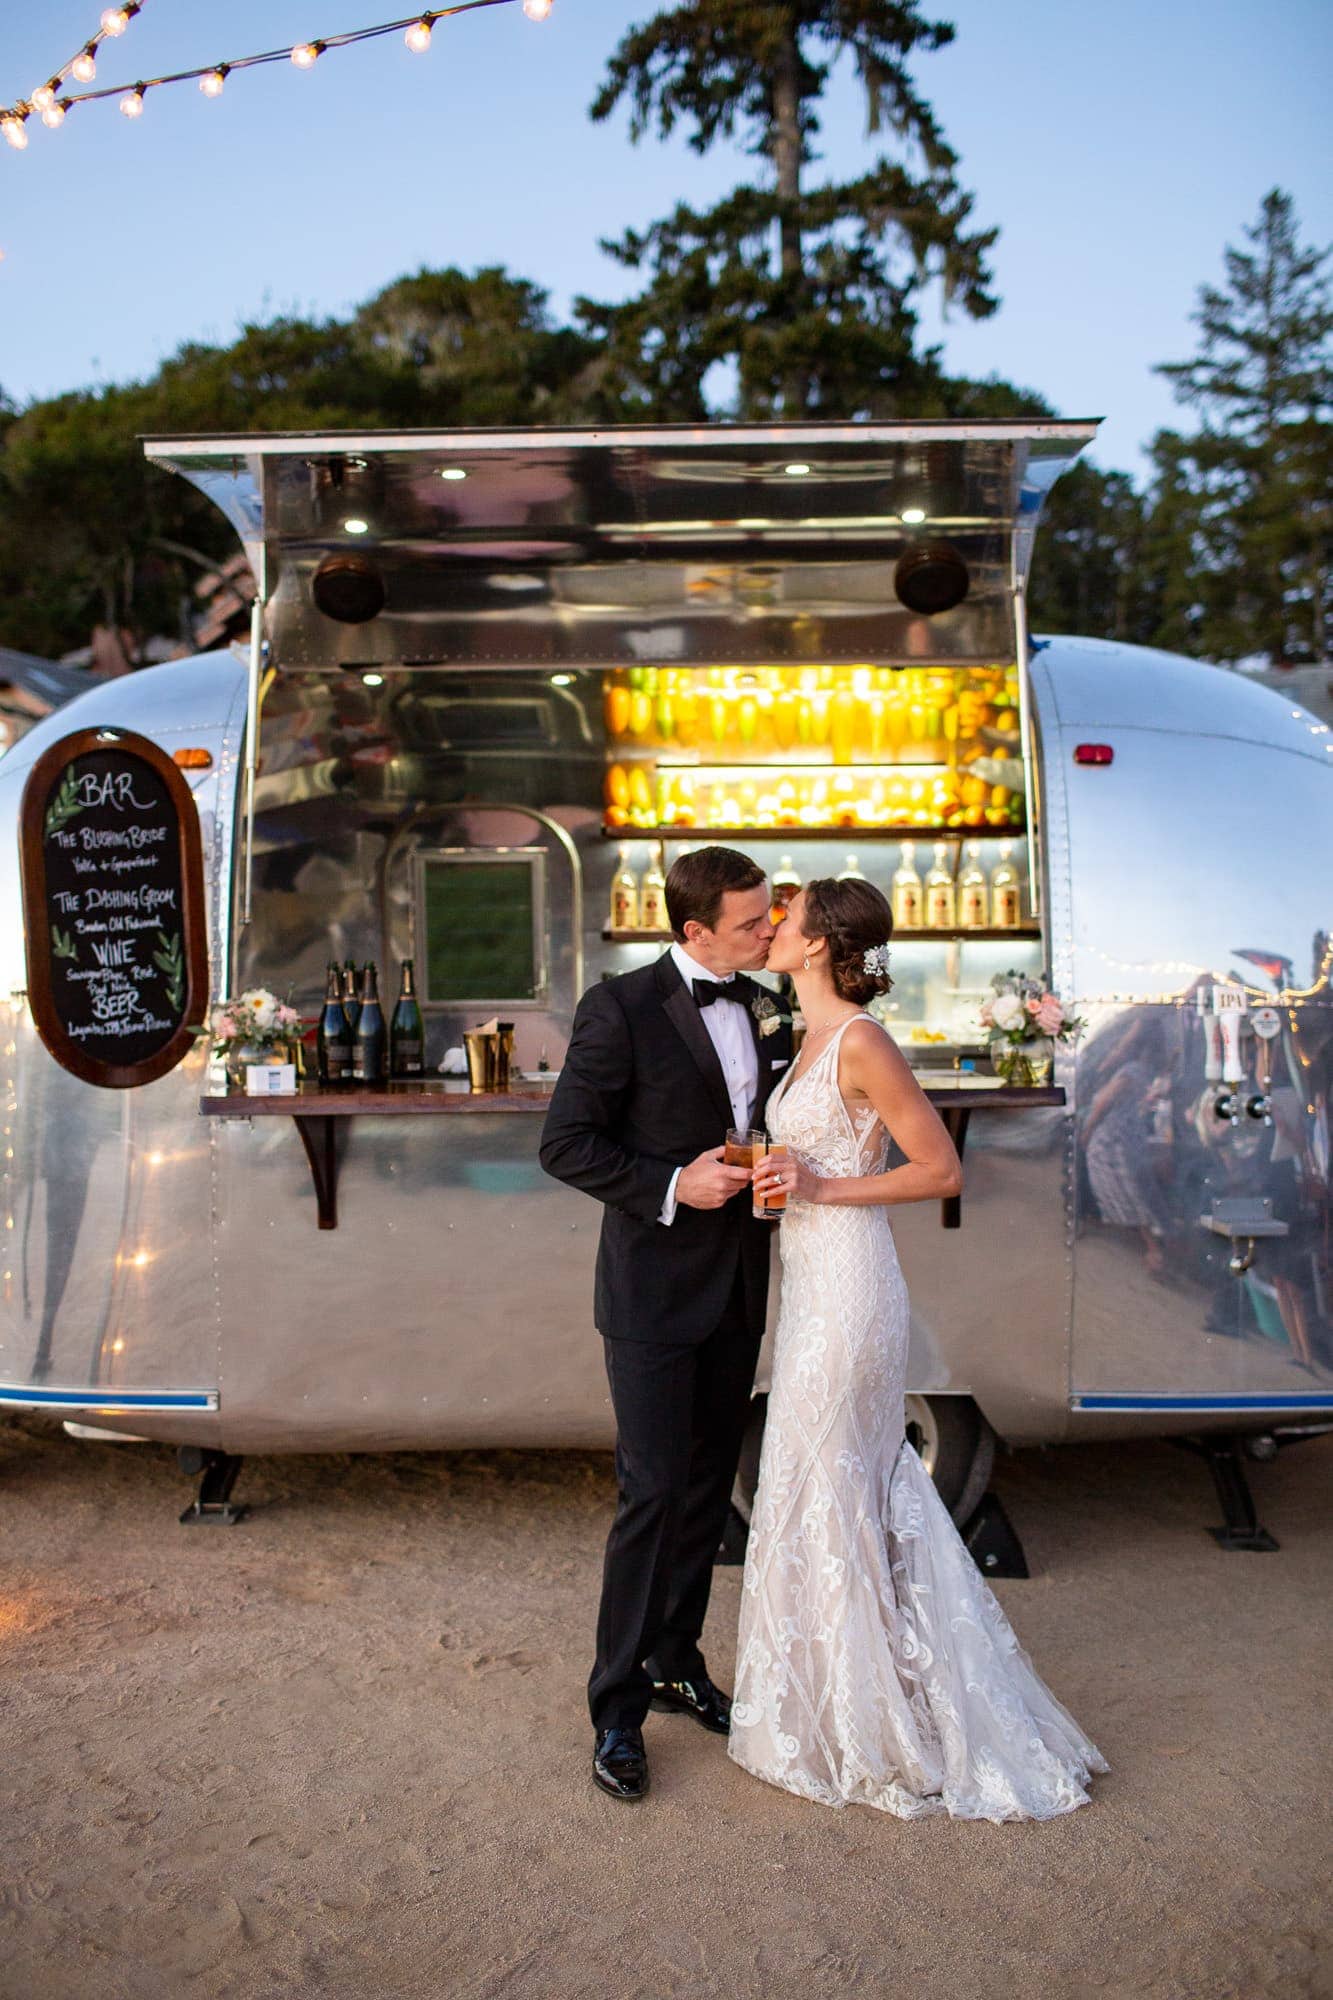 Groom in tuxedo and bride kissing and cheersing in front of an airstream bar at sunset